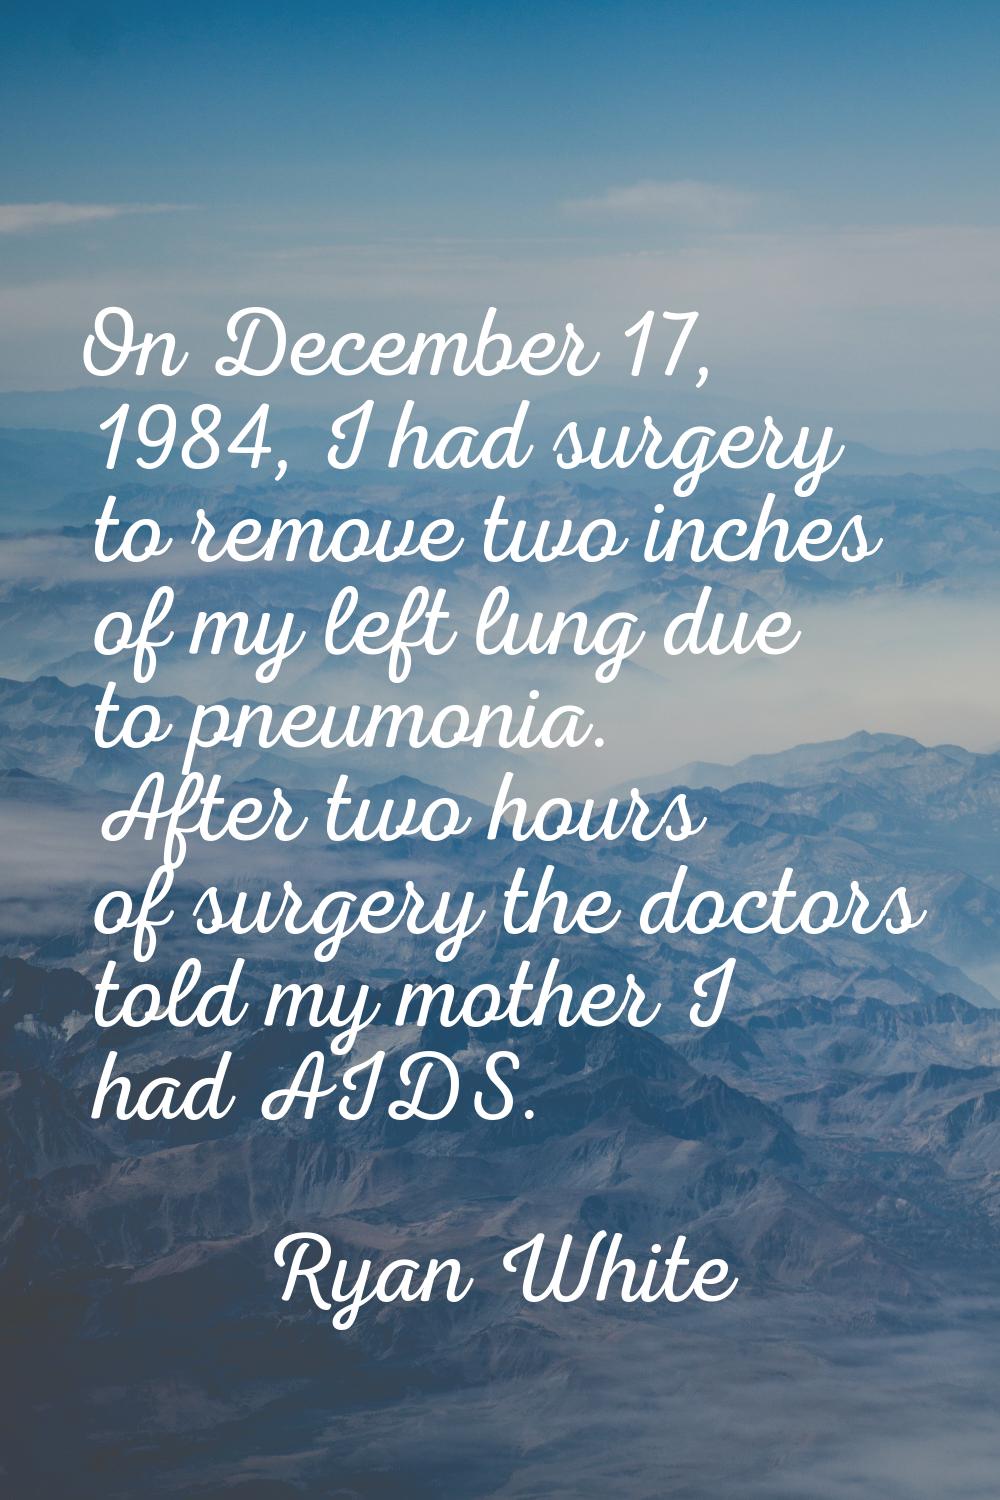 On December 17, 1984, I had surgery to remove two inches of my left lung due to pneumonia. After tw